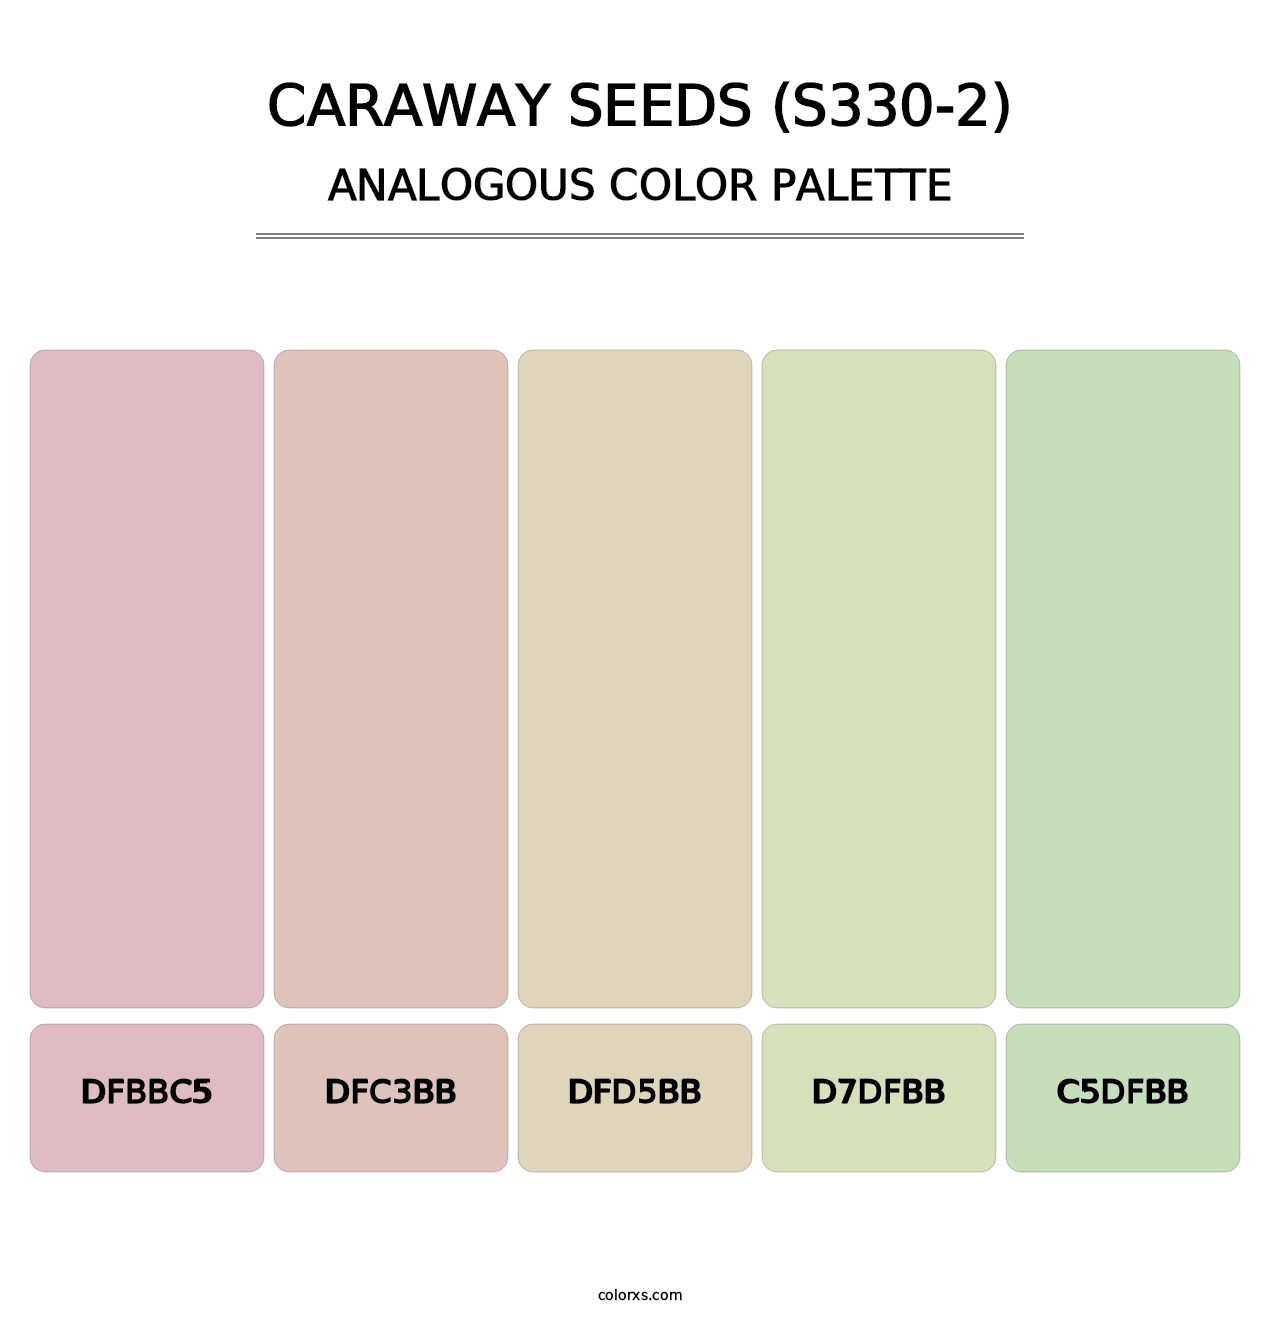 Caraway Seeds (S330-2) - Analogous Color Palette